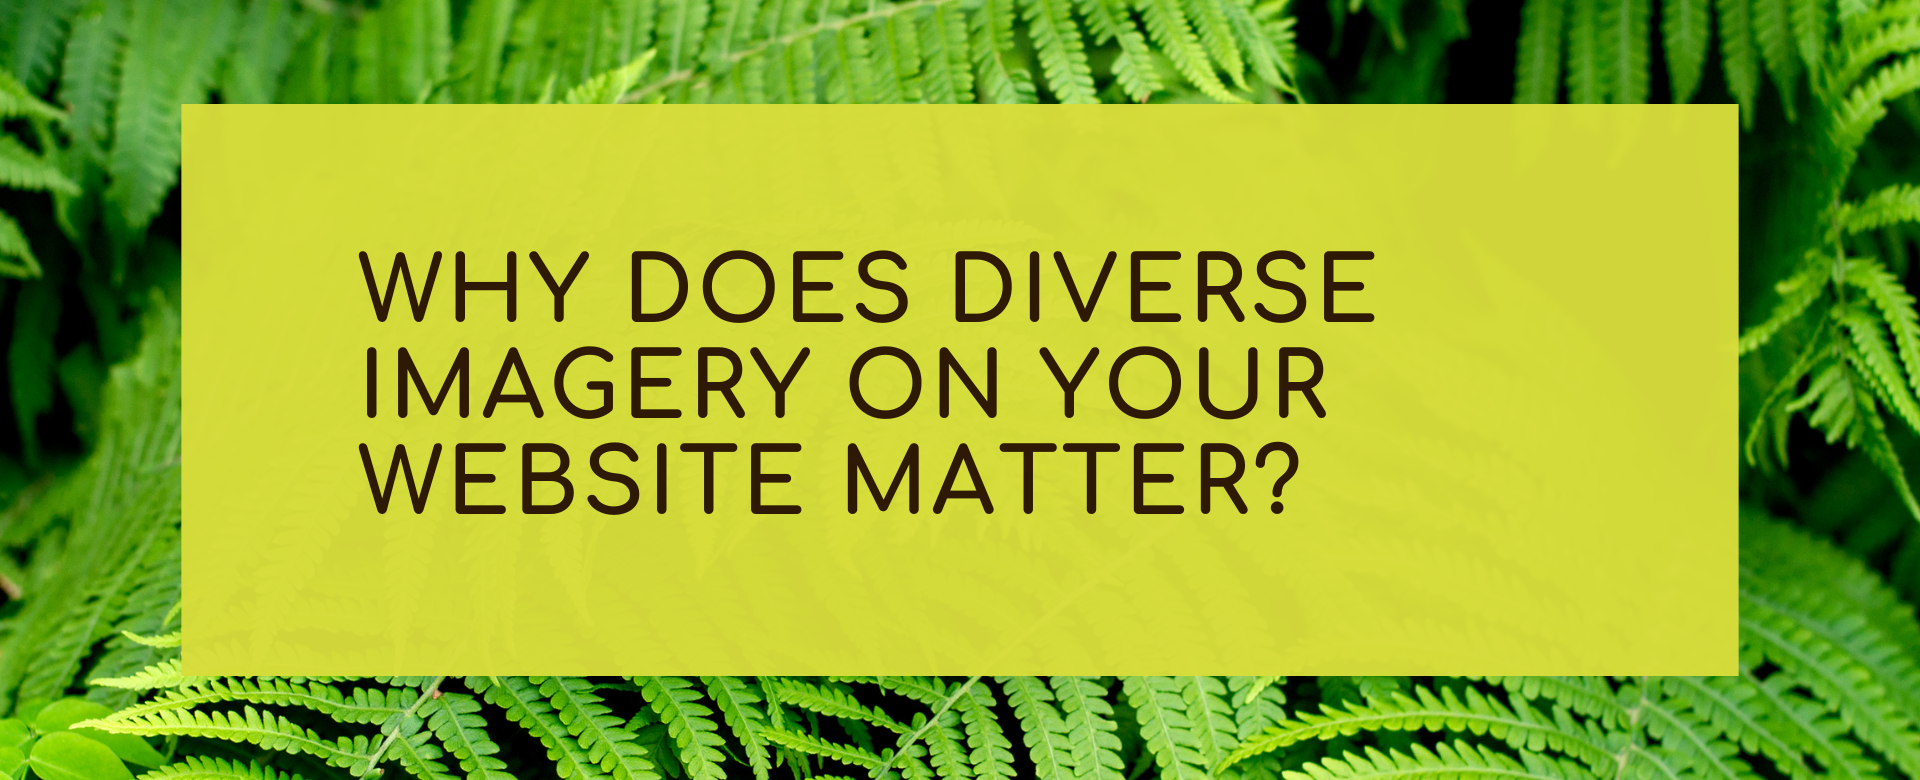 Why does diversity matter when it comes to imagery on your website